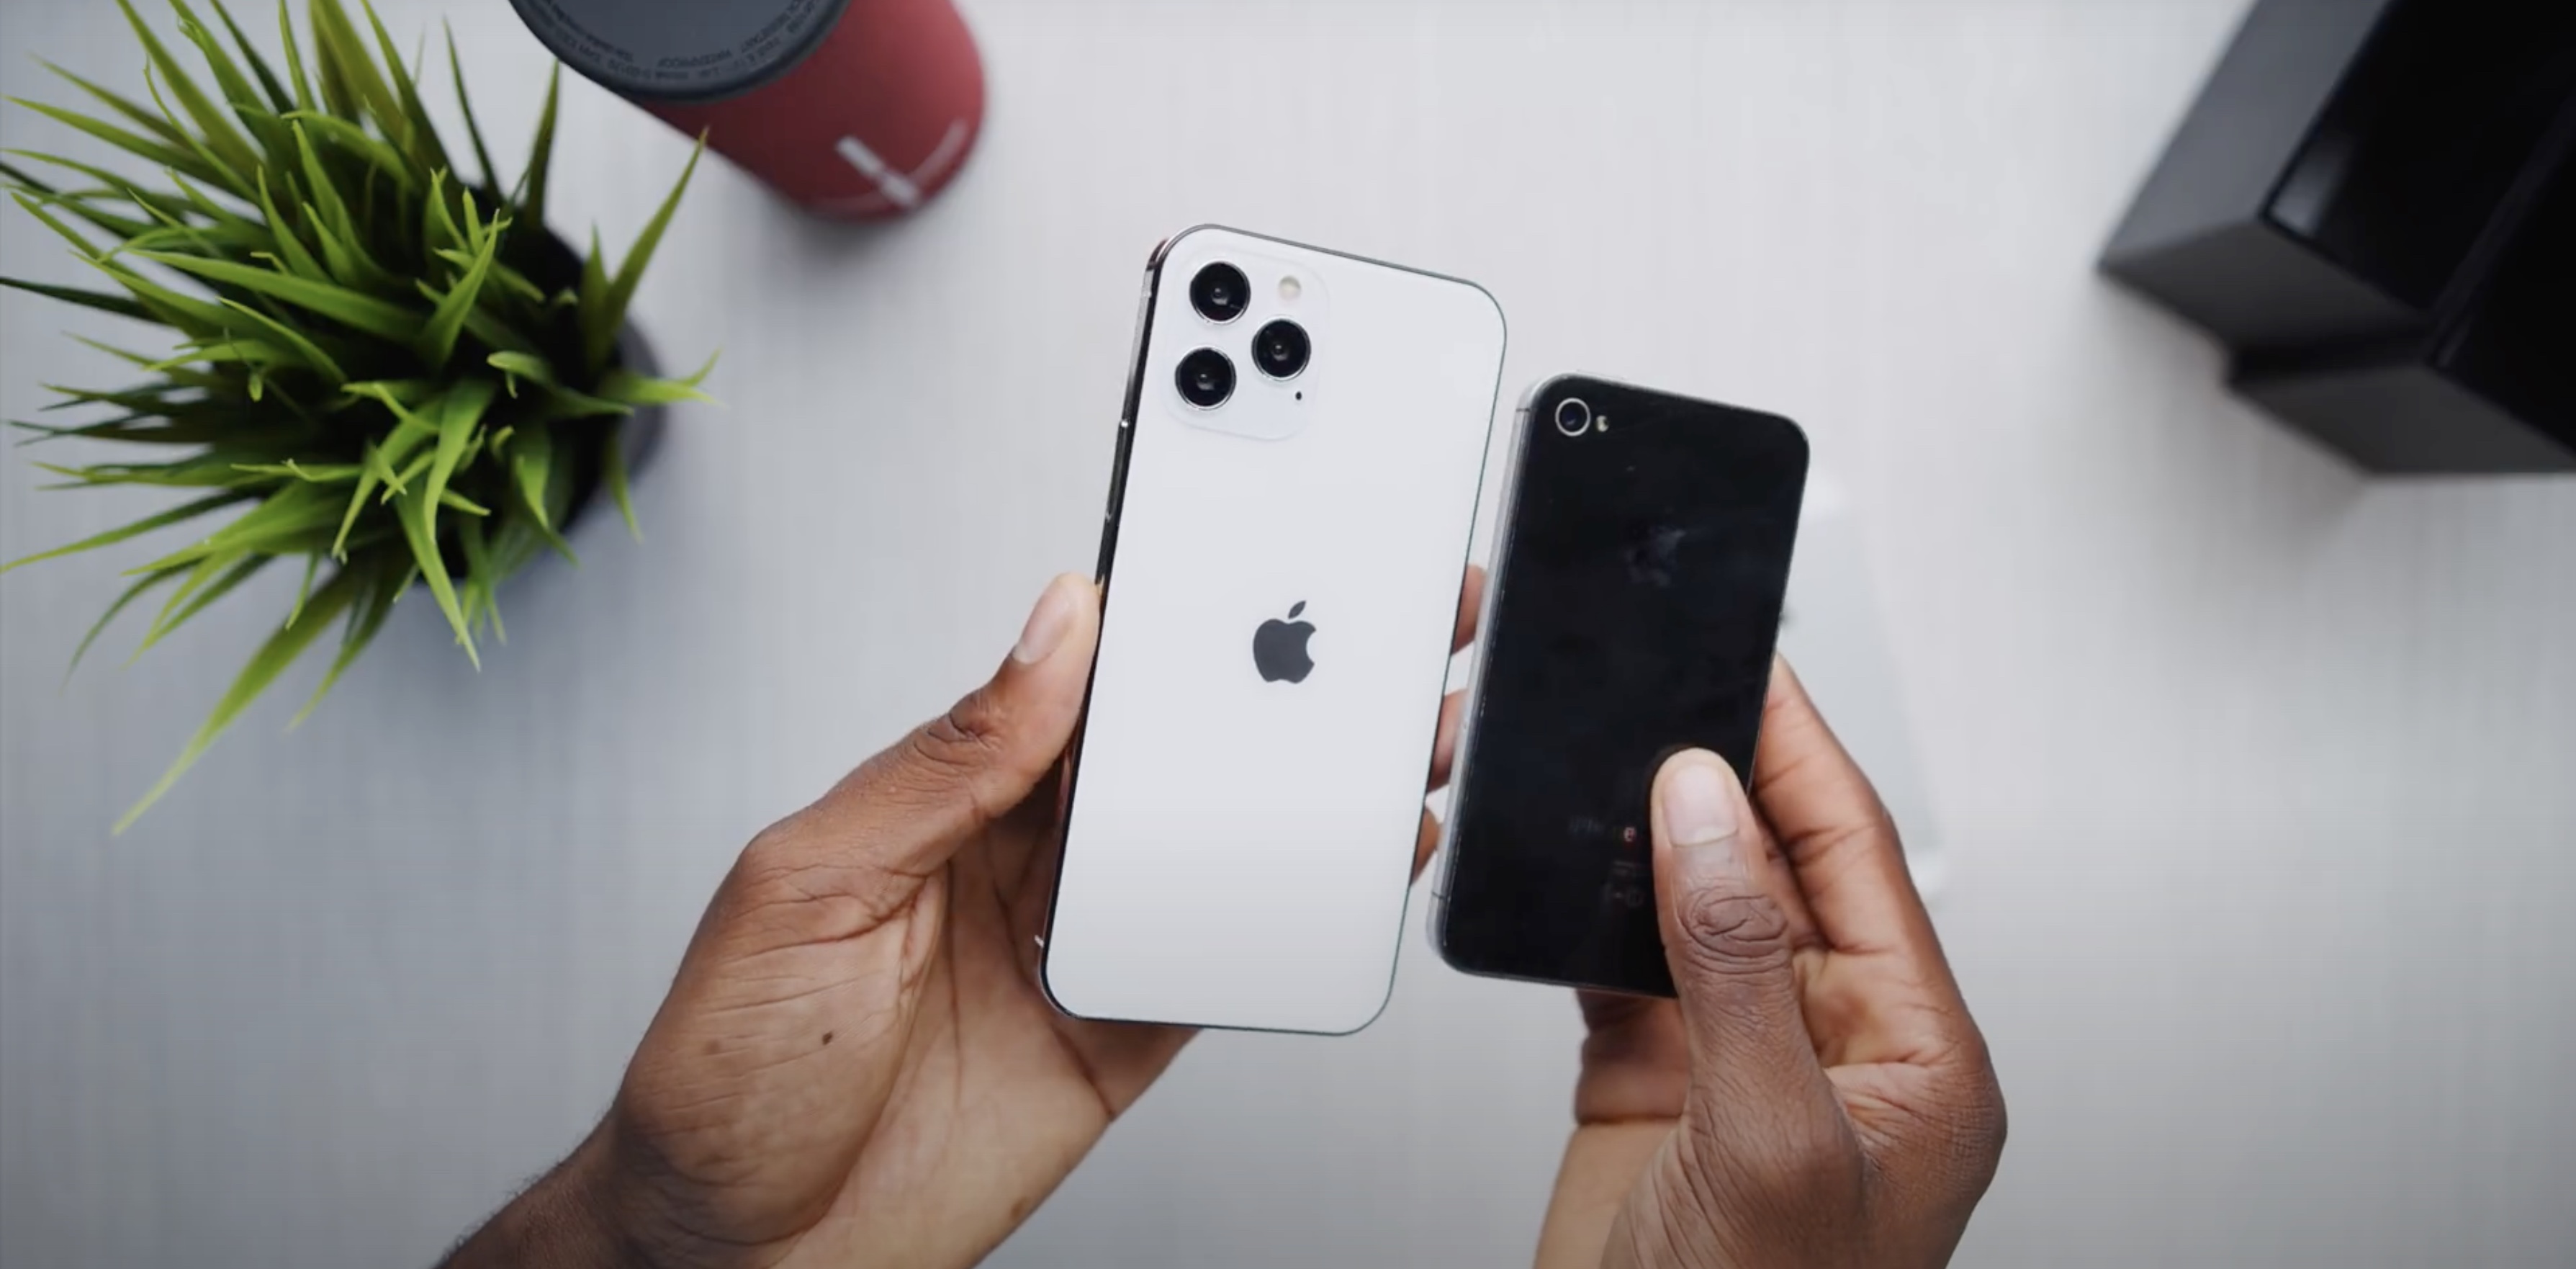 Iphone 12 Dummy Hands On Video Offers Detailed Comparisons 9to5mac